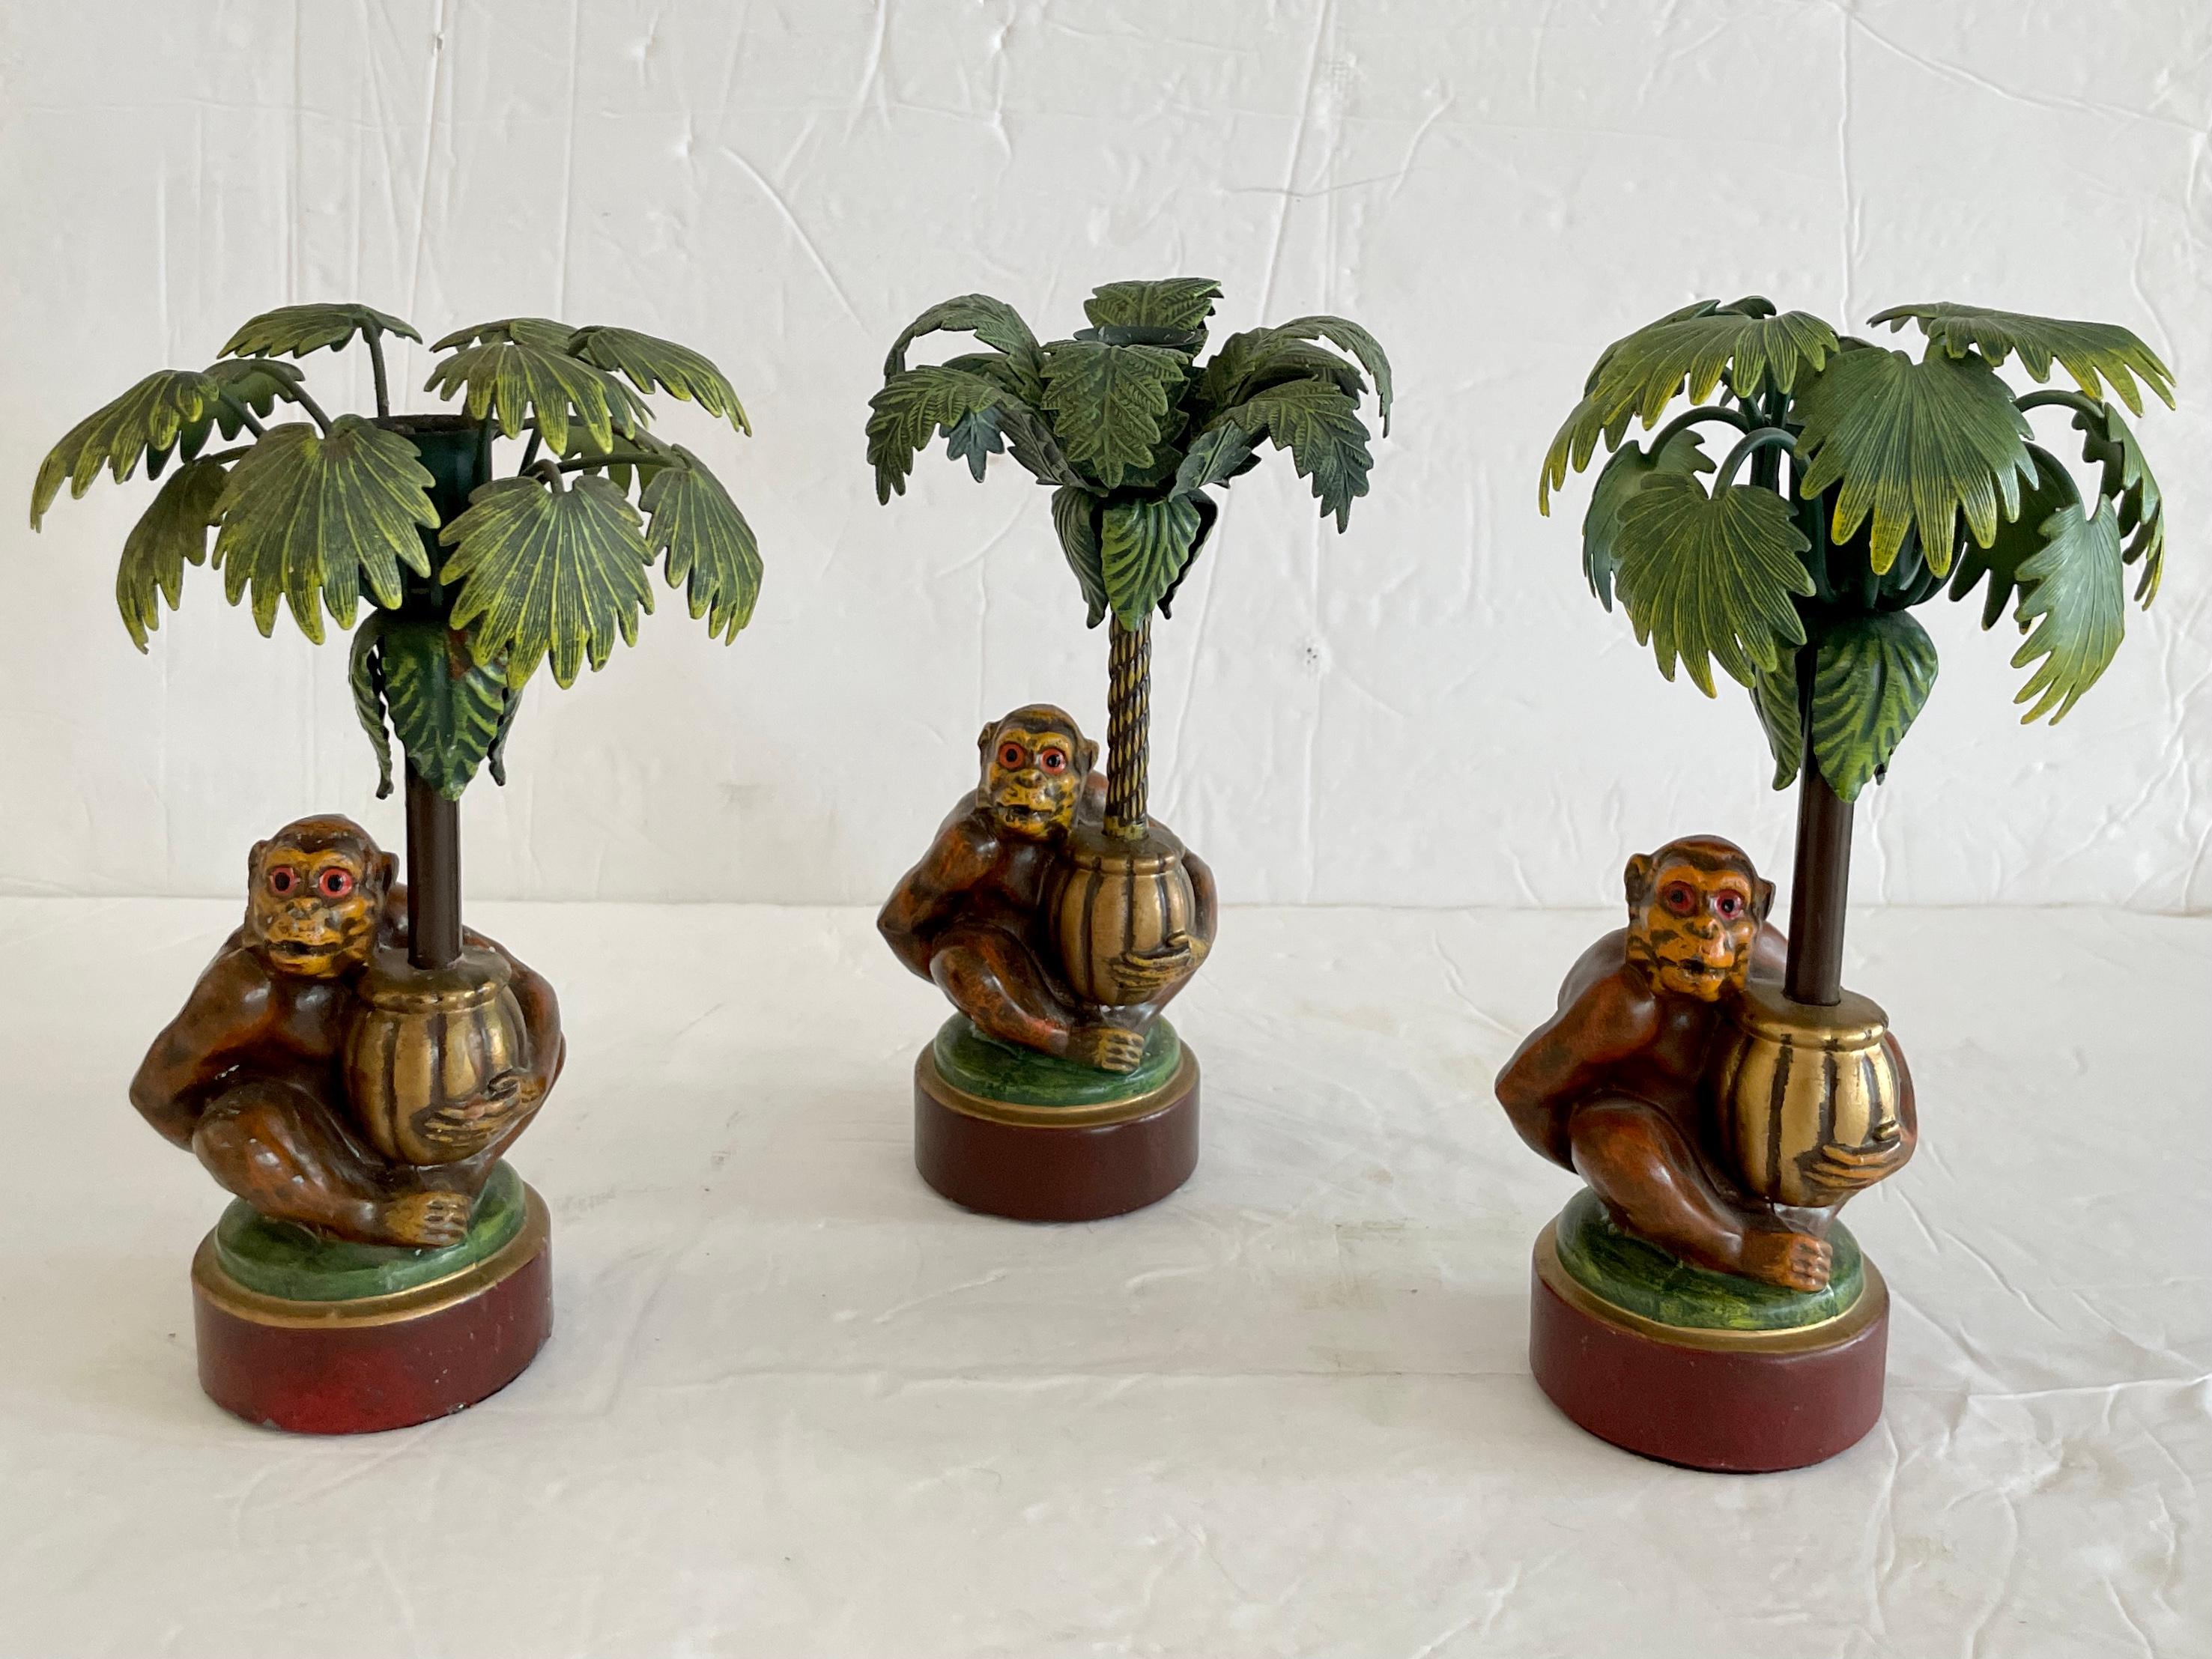 Fun set of 3 Boho Chic metal Tole monkeys candlestick holders. Great sculpting details.